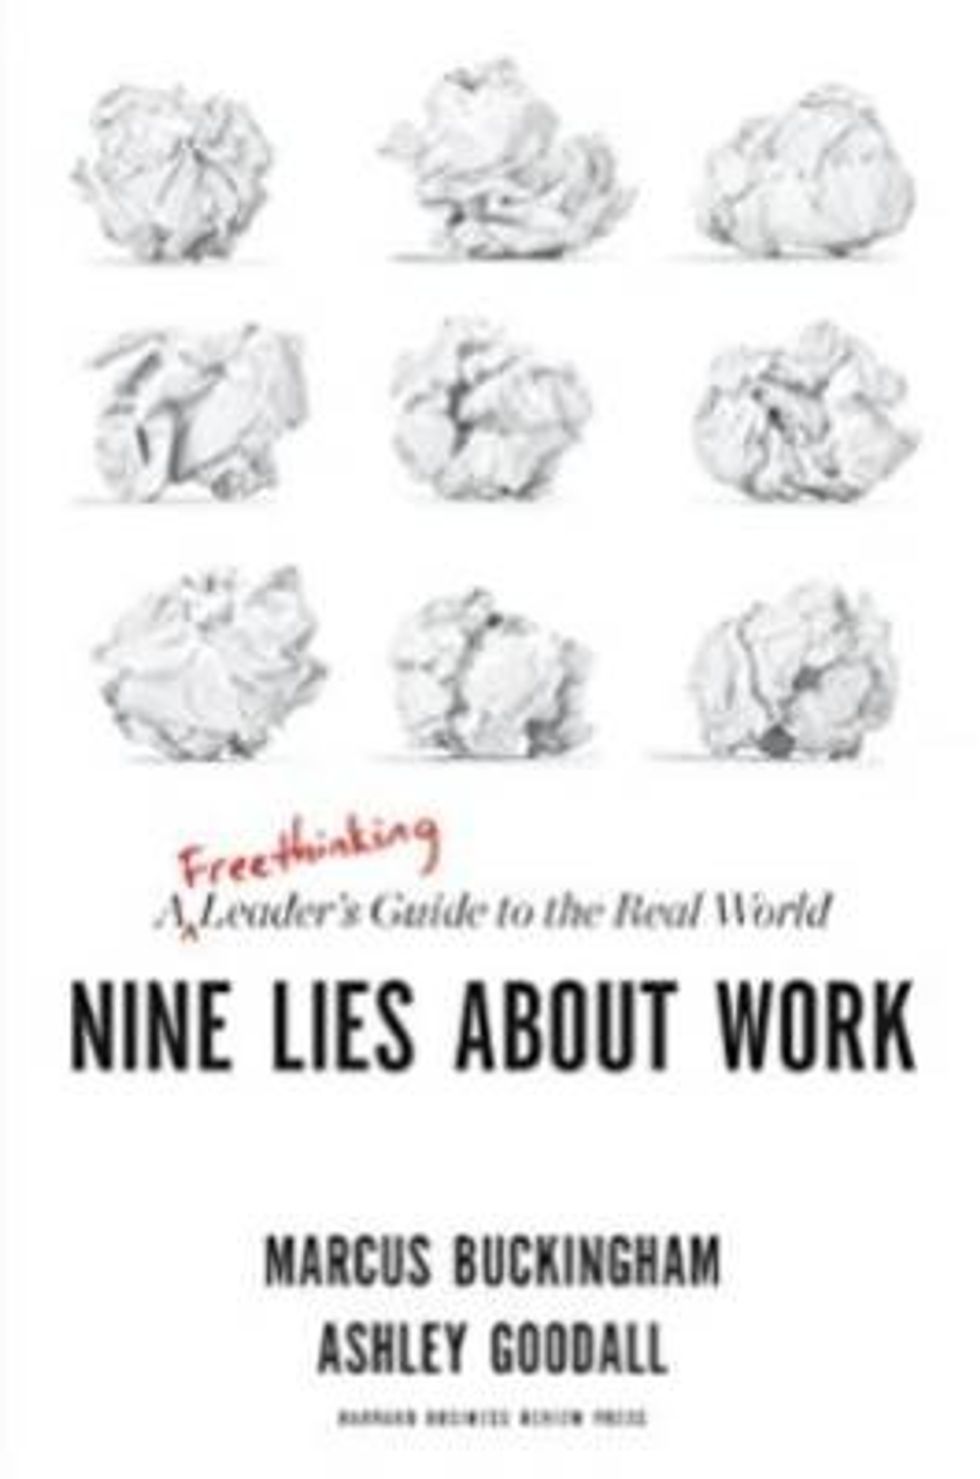 The front cover of the book "Nine Lies About Work: A Freethinking Leader\u2019s Guide to the Real World" by Ashley Goodall and Marcus Buckingham